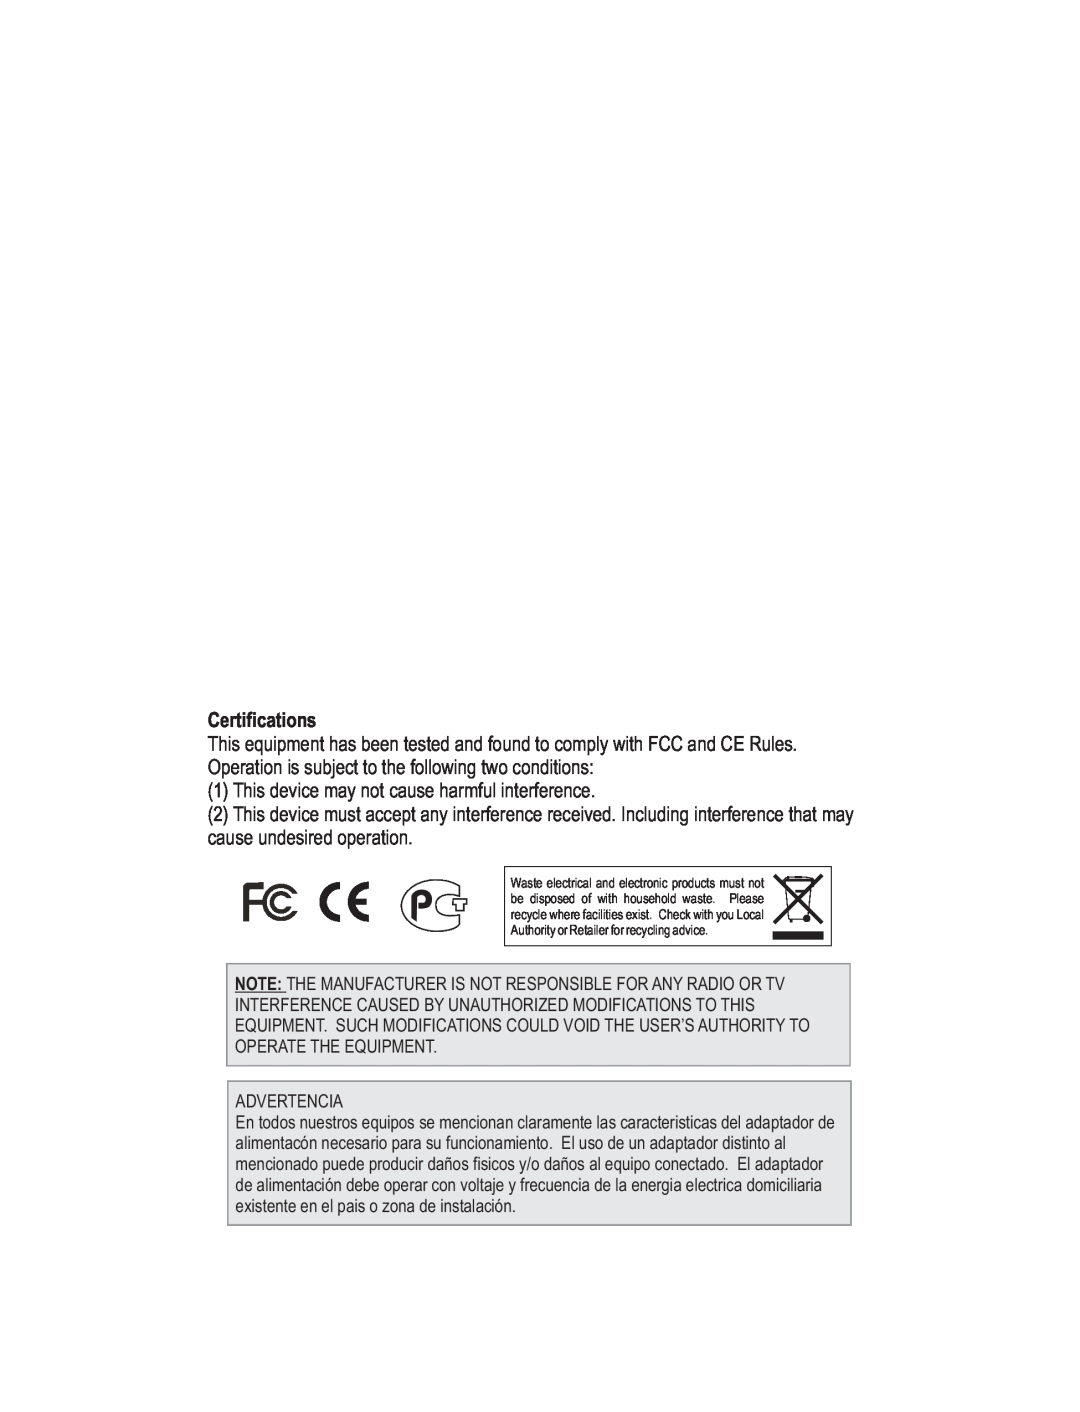 TRENDnet TEW-636APB manual Certifications, This device may not cause harmful interference 